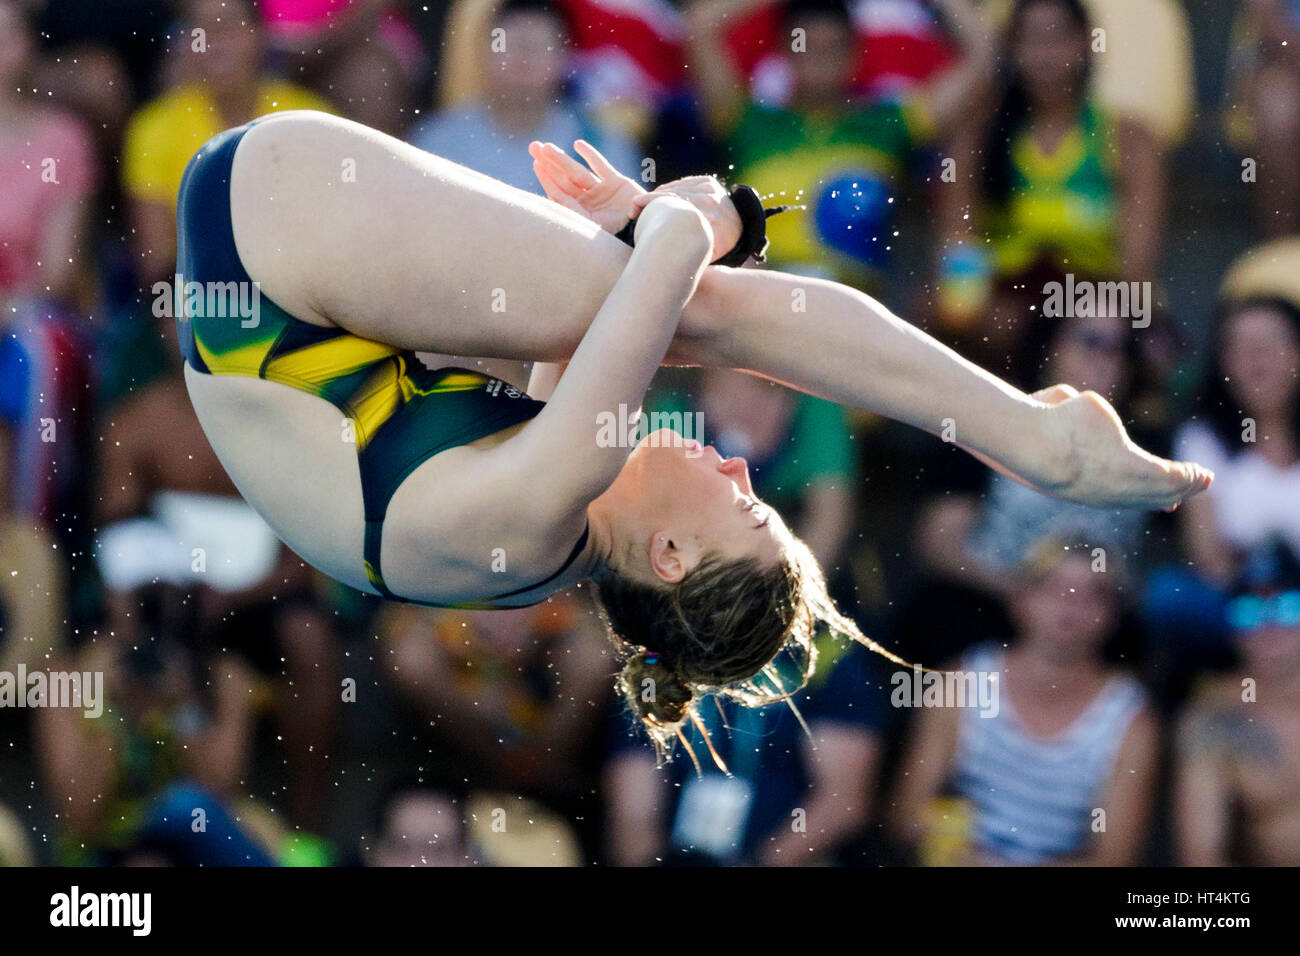 Rio de Janeiro, Brazil. 18 August 2016 Brittany O'Brien (AUS) competes in the Women Diving Platform 10m preliminary at the 2016 Olympic Summer Games. Stock Photo